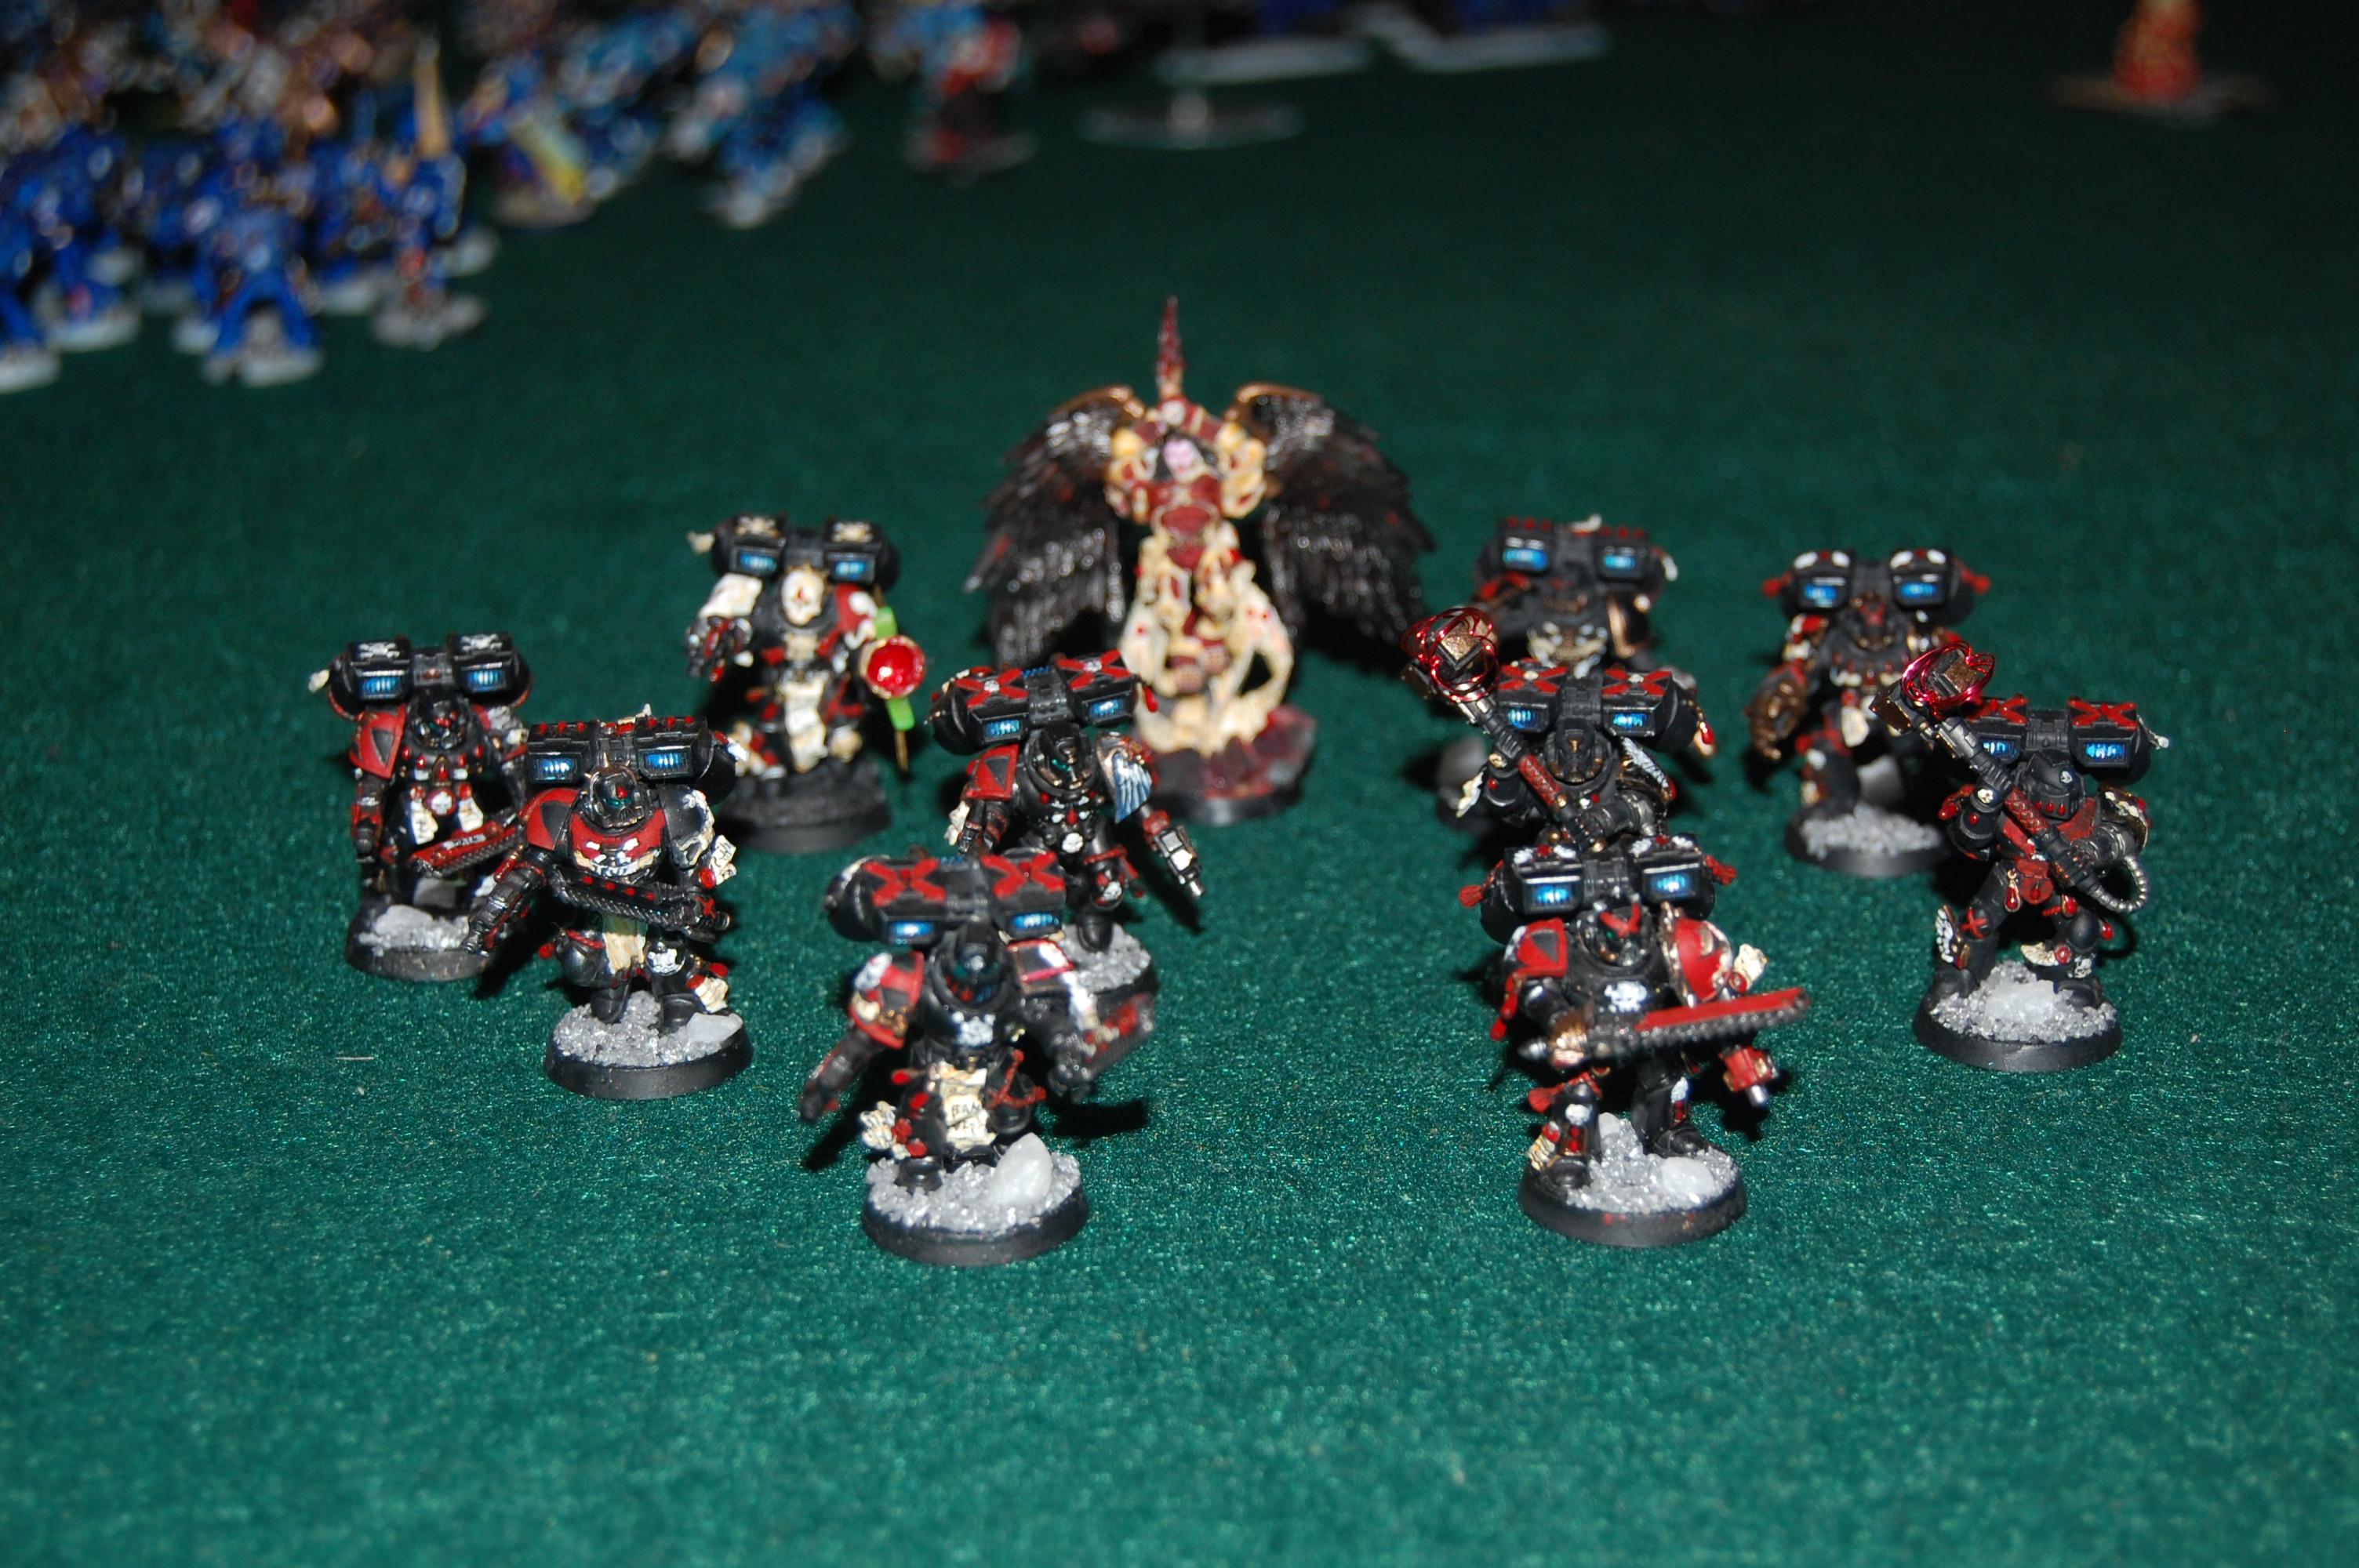 Battle Report, Blood Angels, Chaplain, Death Company, Group, Mephiston, Space Marines, Warhammer 40,000